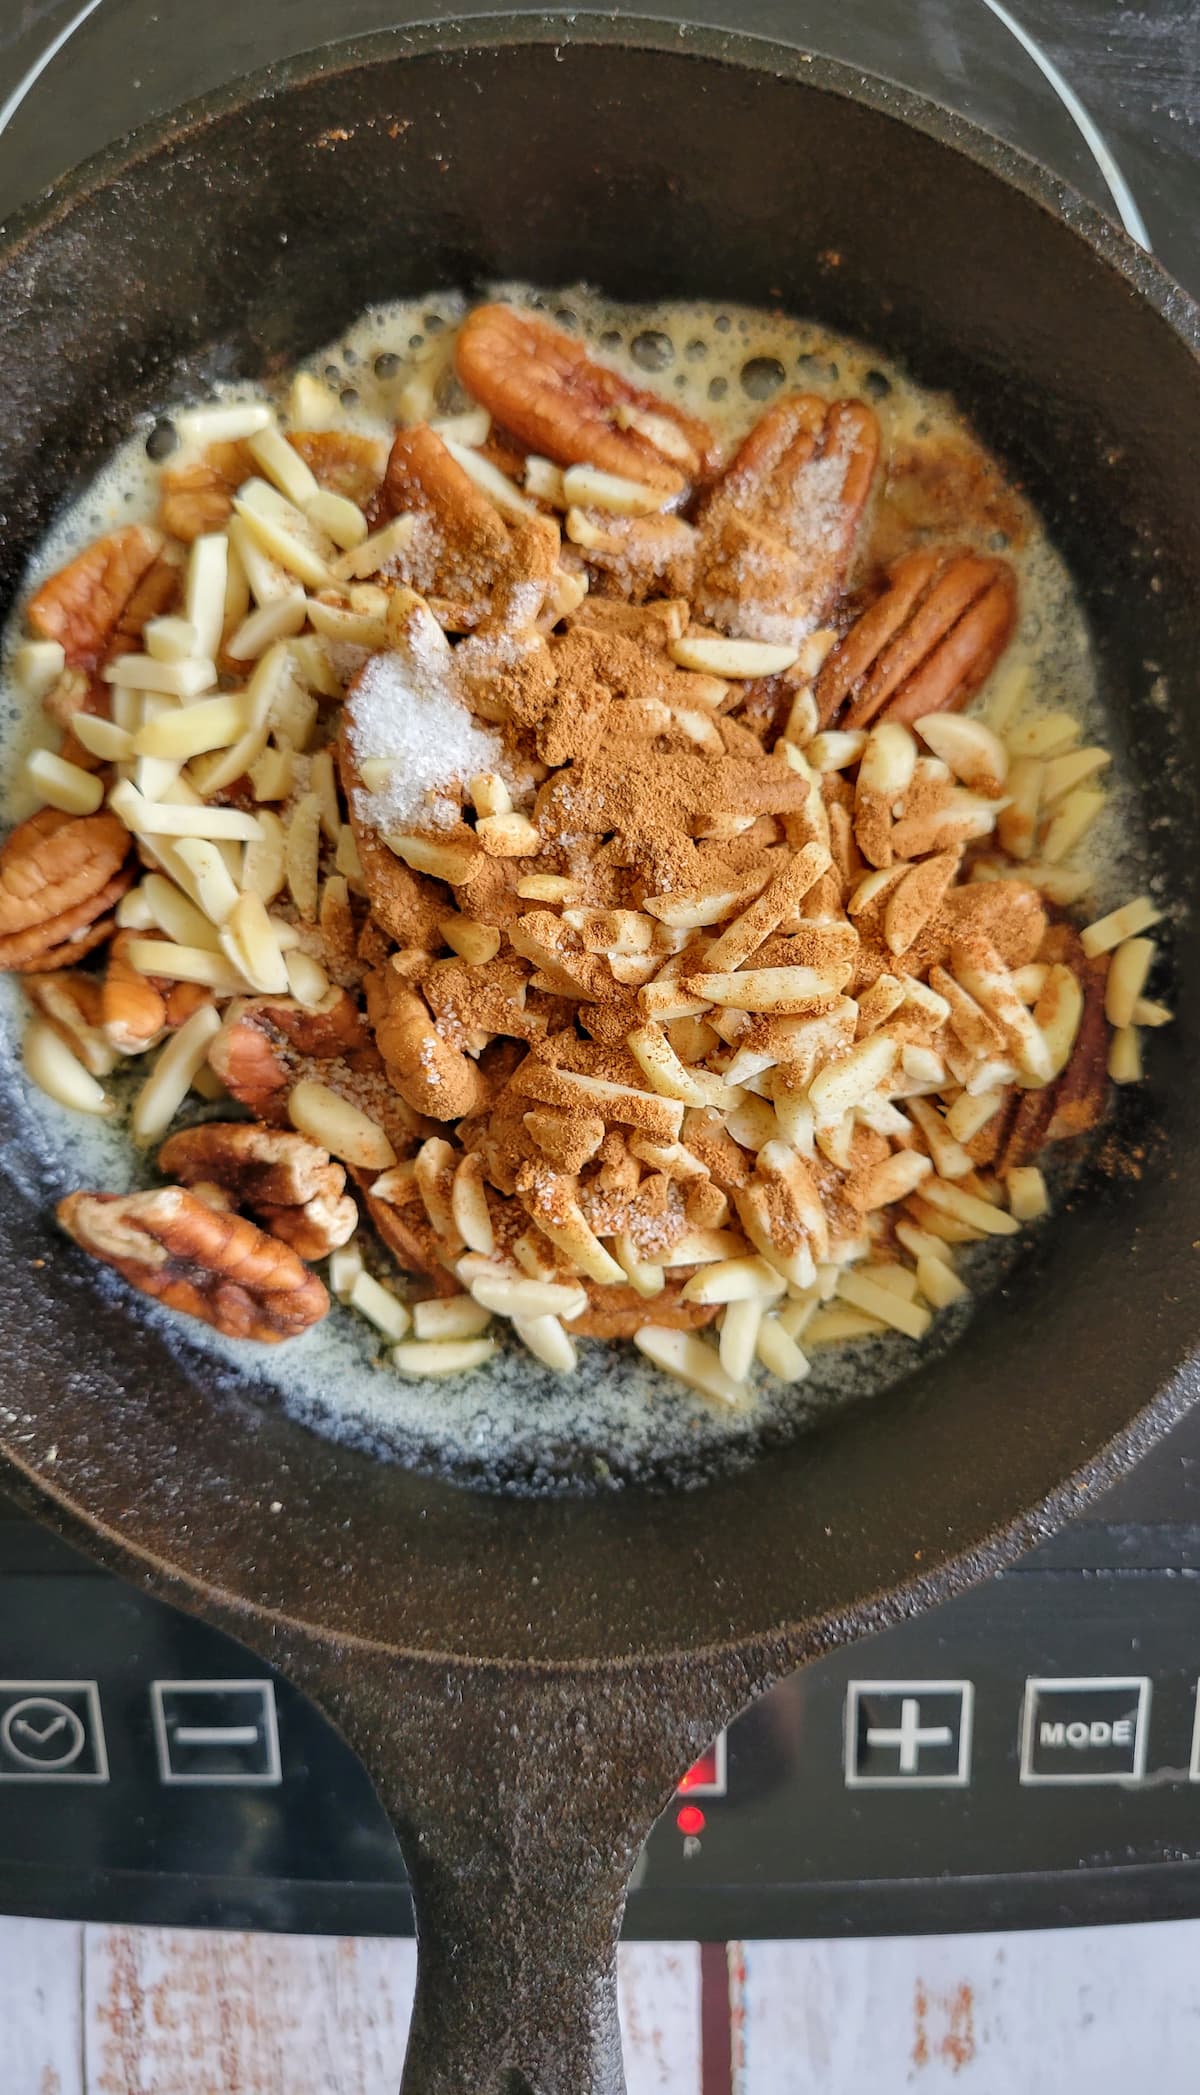 pecans and slivered almonds in a cast iron skillet on a burner with spices and melted butter